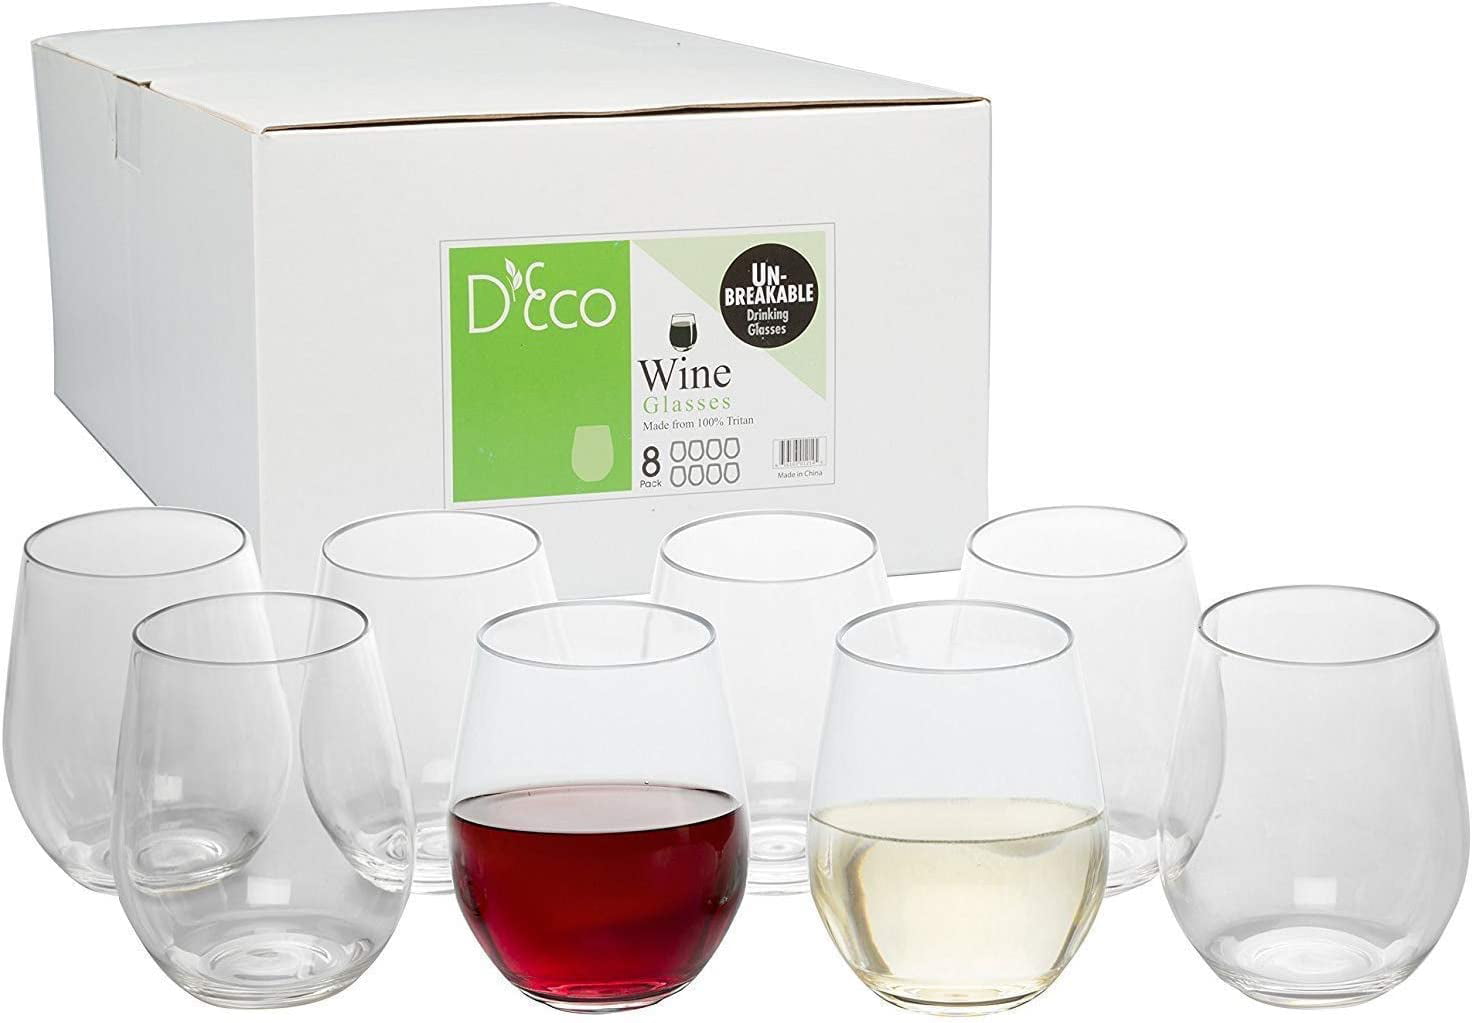  Tebery 20 Pack Unbreakable Plastic Wine Glasses Stemless, 16 Oz  Heavy Duty Clear Drinking Glasses Wine Cups, Disposable & Reusable for  Champagne, Dessert, Food Samples, Catering, Weddings : Health & Household